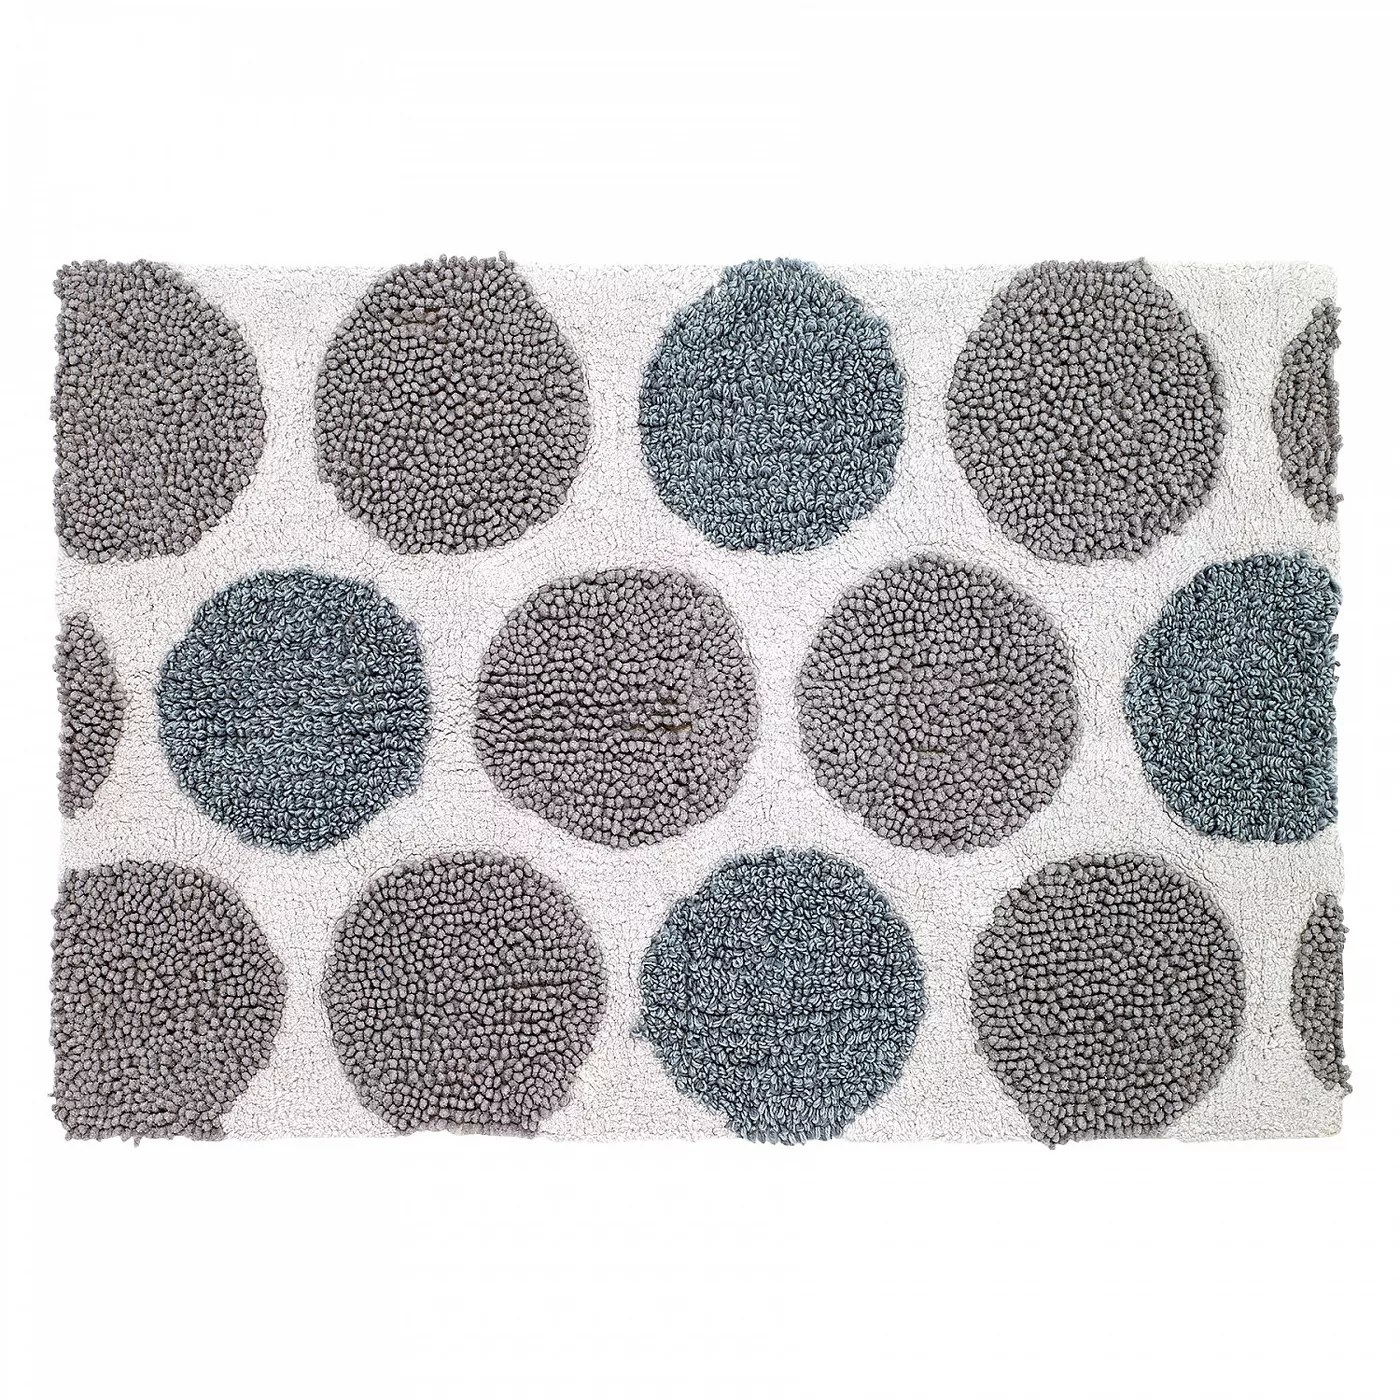 A dotted circles shower rug